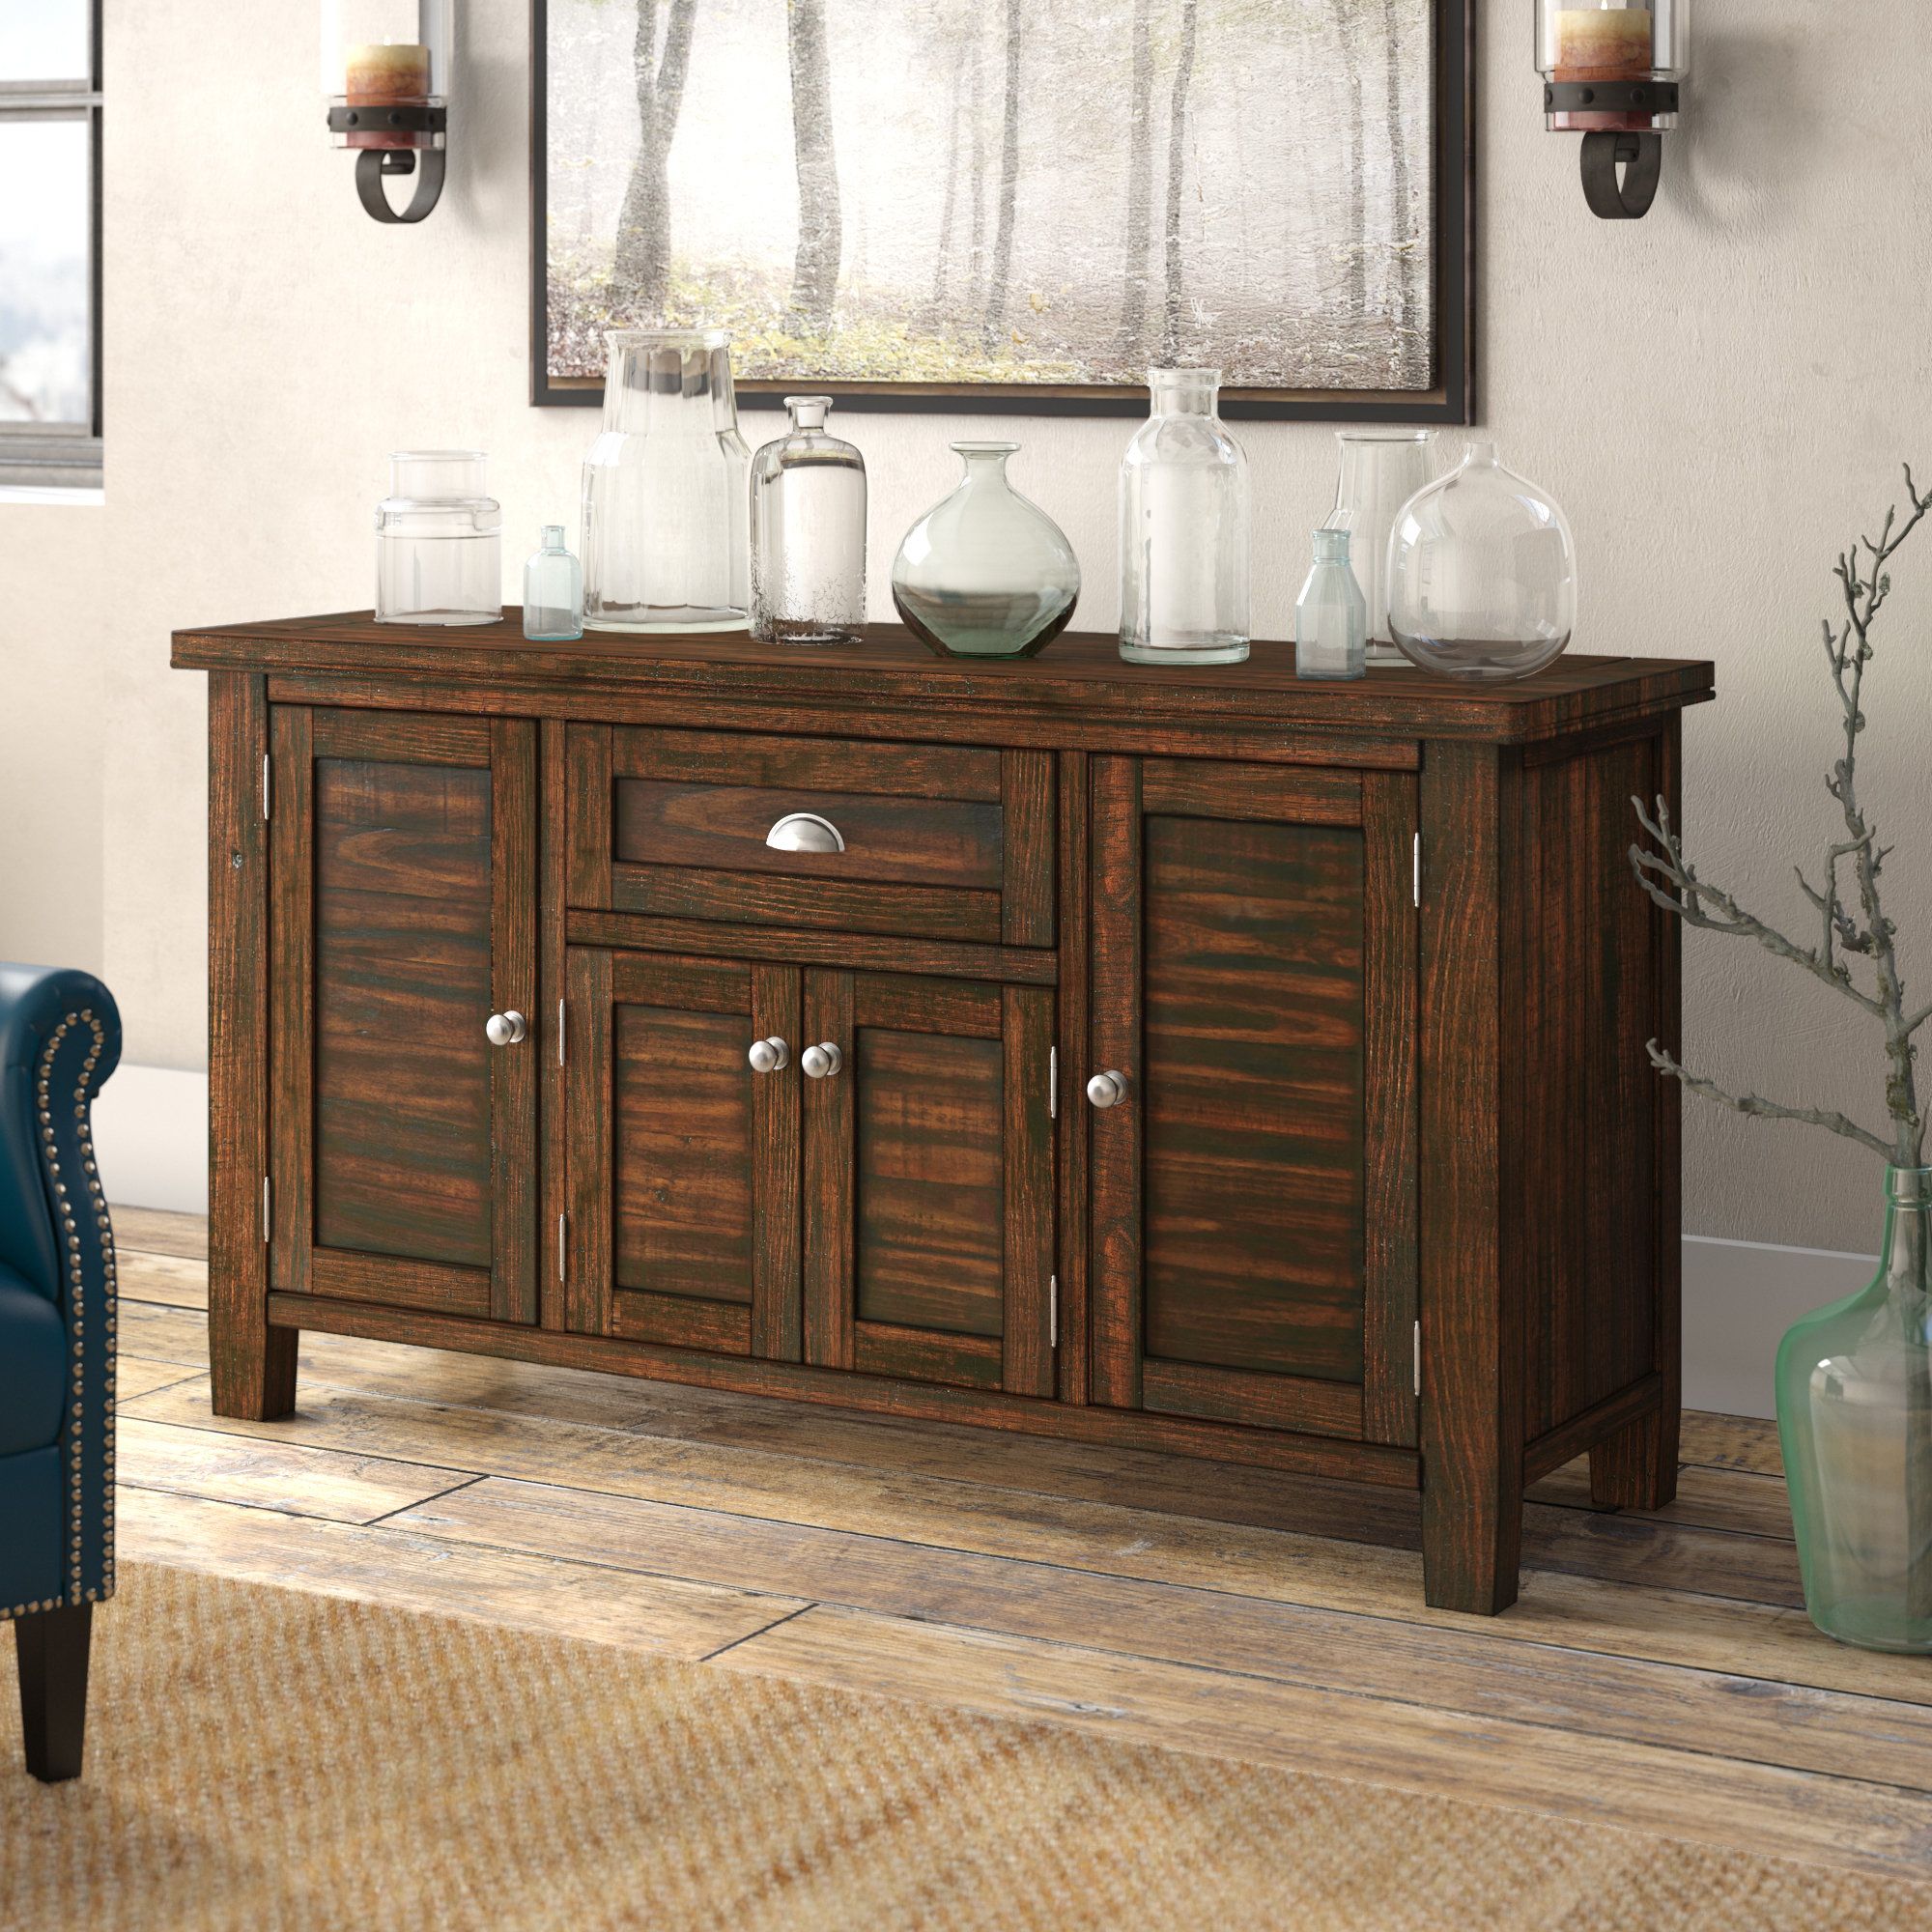 Chaffins Sideboard Pertaining To Seiling Sideboards (View 5 of 30)